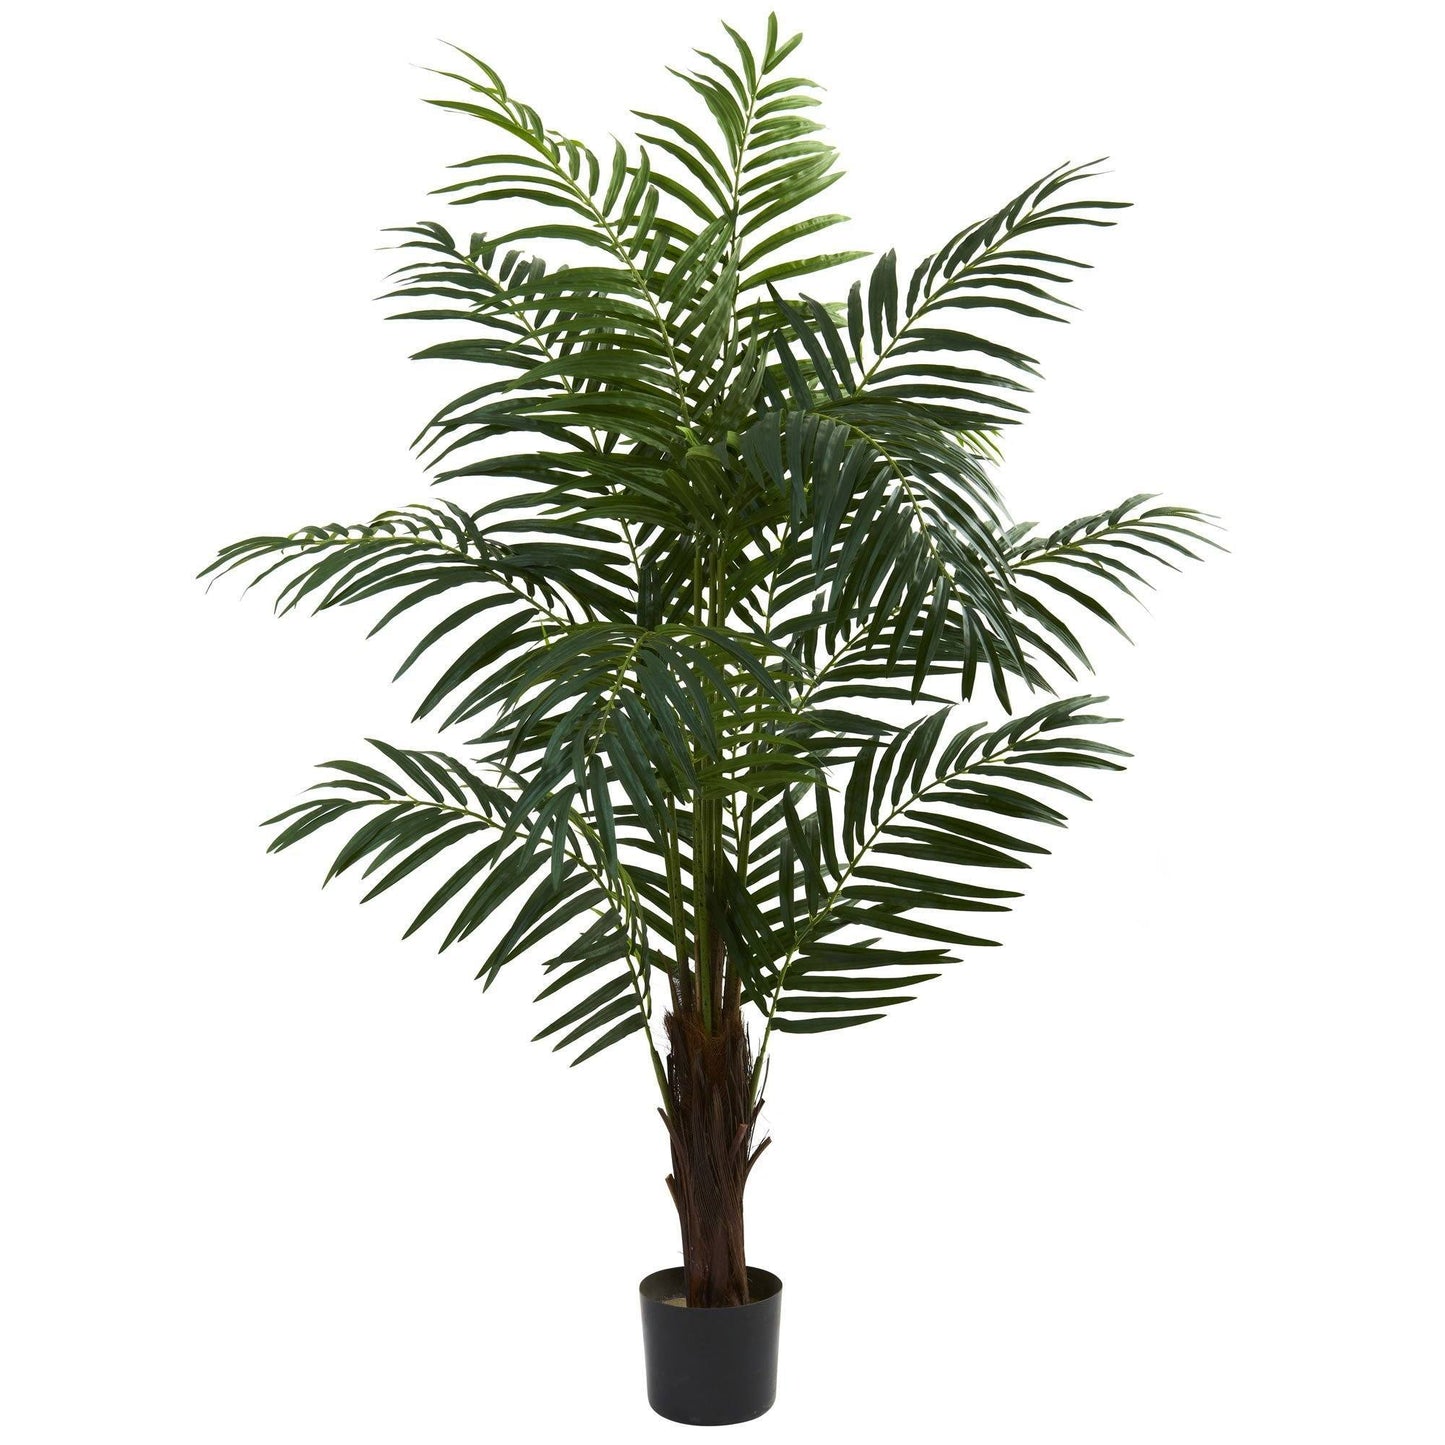 5' Areca Palm Tree by Nearly Natural